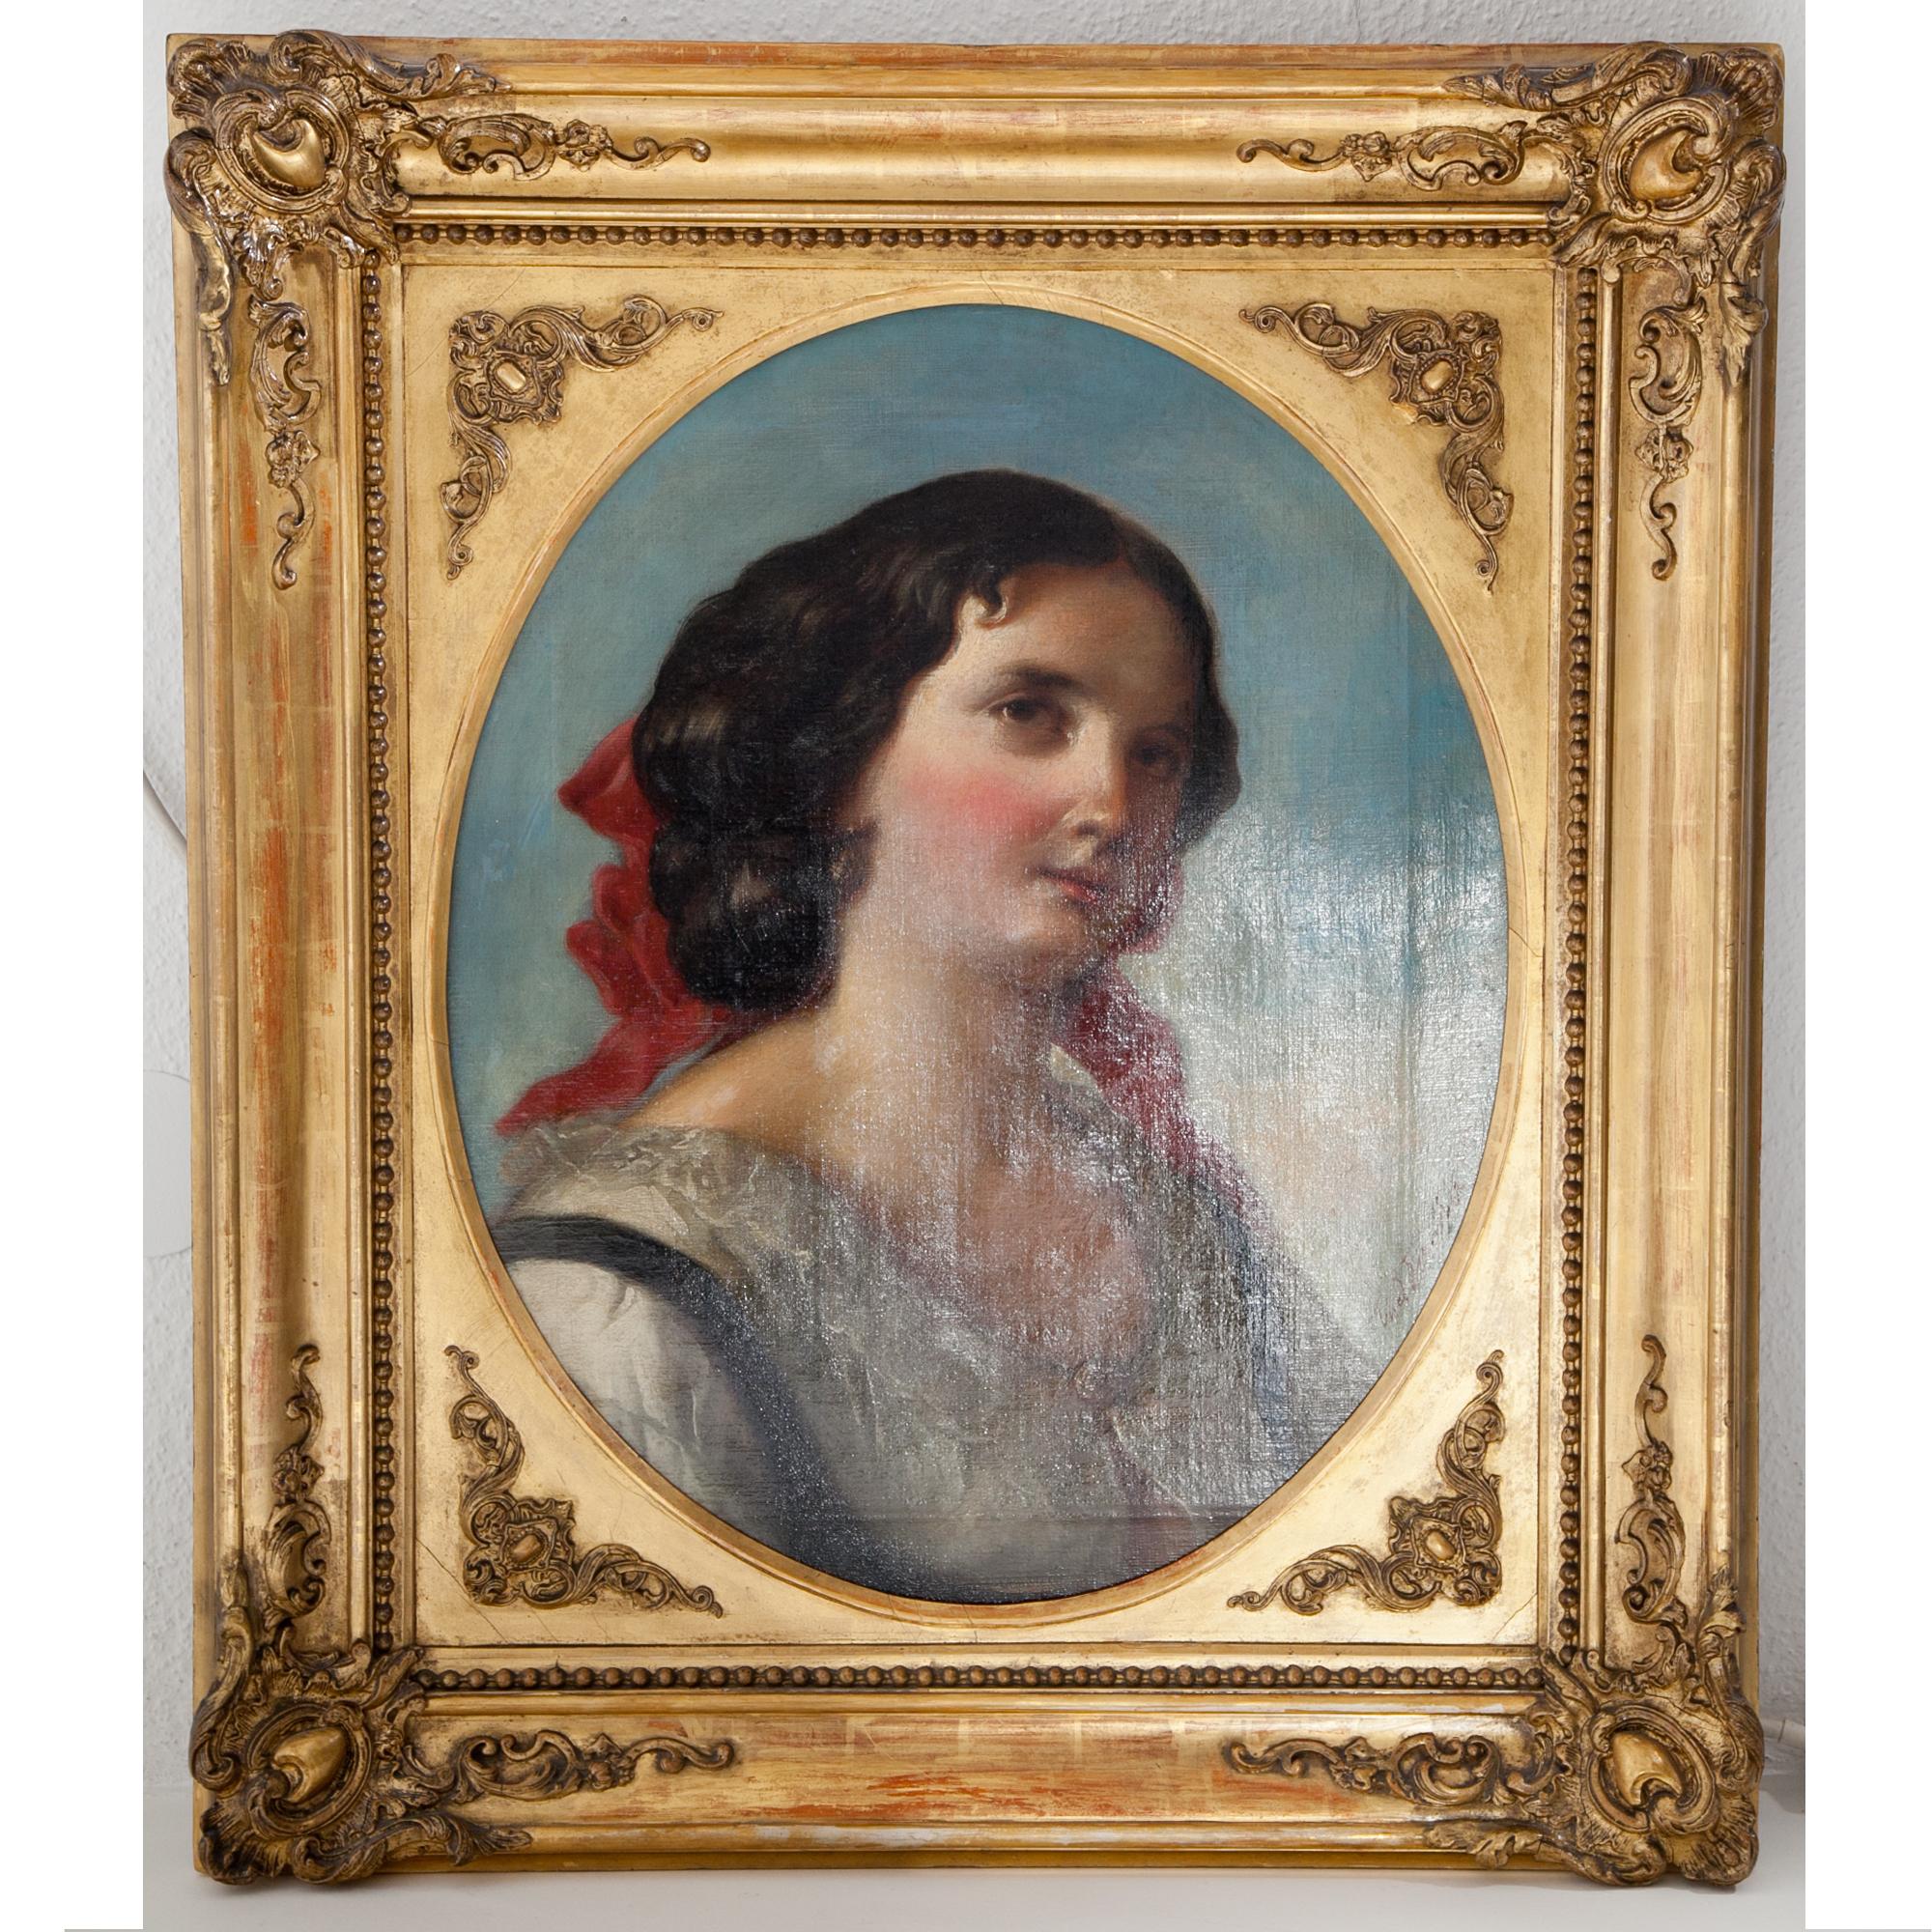 Portrait of a young woman dressed in a white lace blouse, with a red bow in her dark curly hair. She is placed in front of a diffuse blue background in three quarters view. Oil on canvas and framed in a golden patinated frame with an oval cut-out.